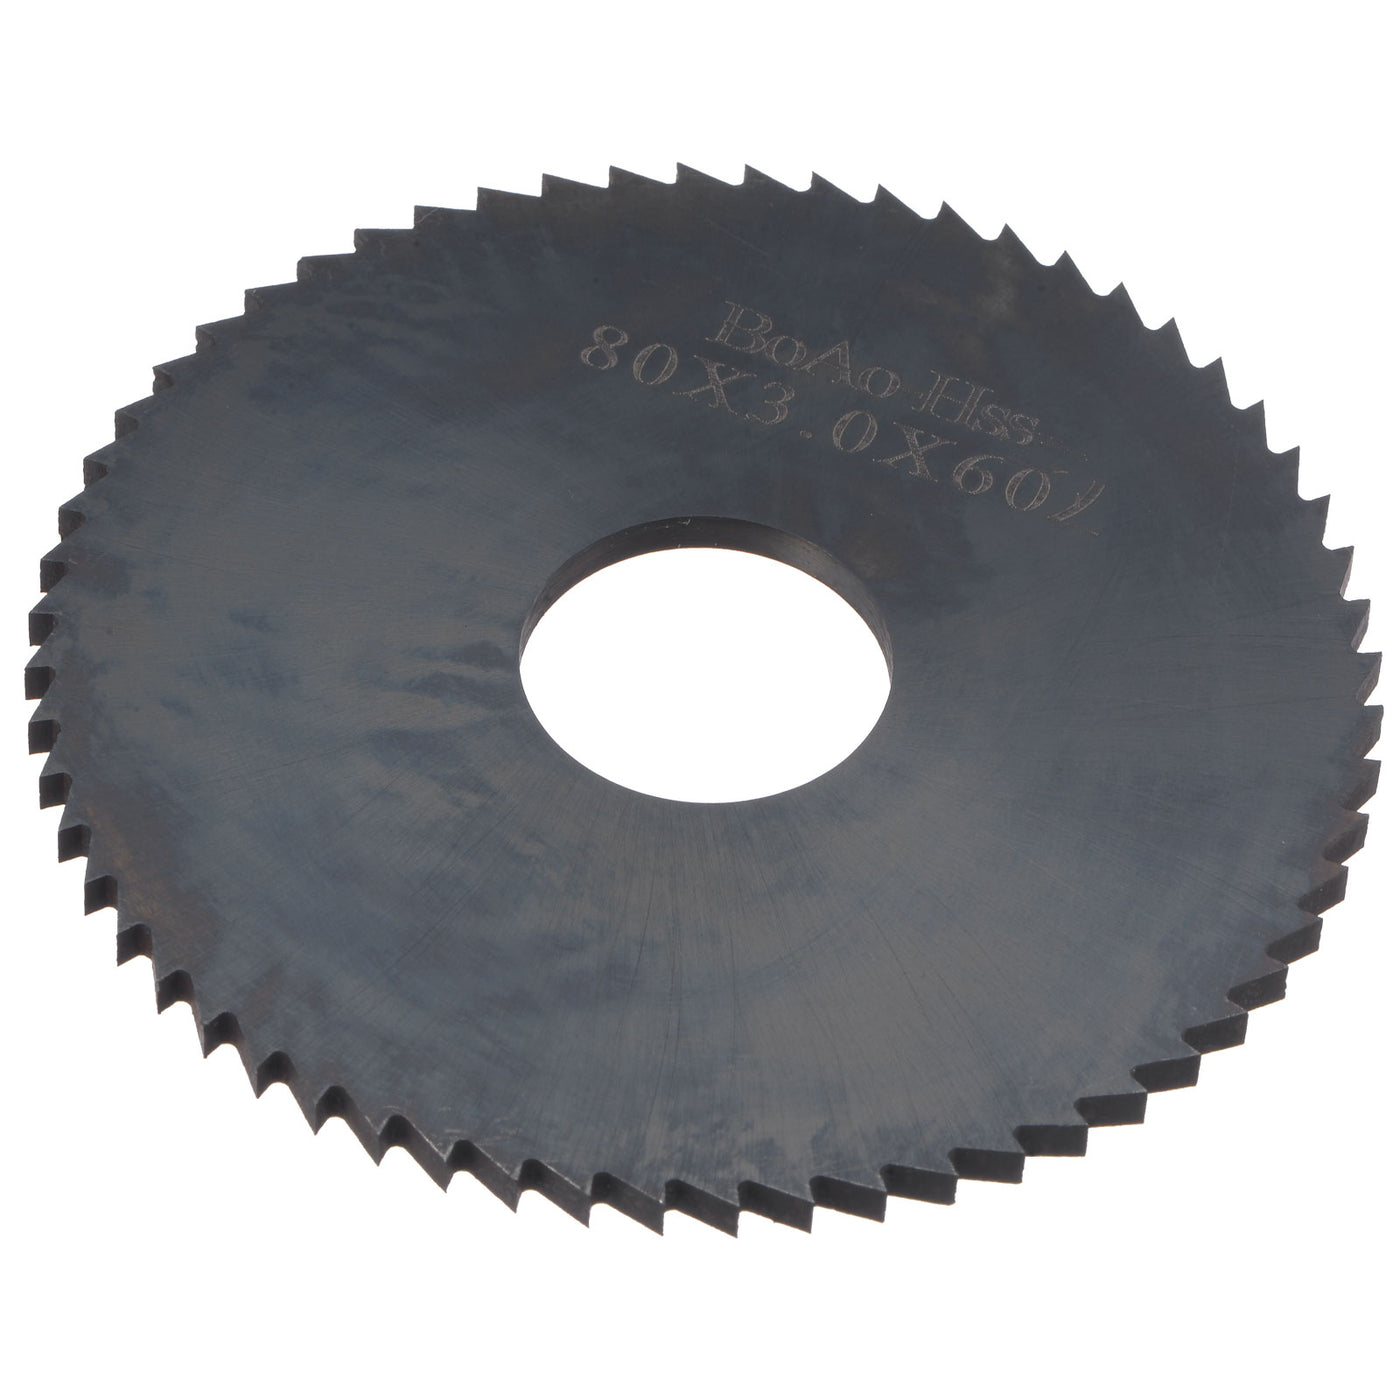 Uxcell Uxcell 80mm Dia 22mm Arbor 3mm Thick 60 Tooth Nitriding Circular Saw Blade Cutter